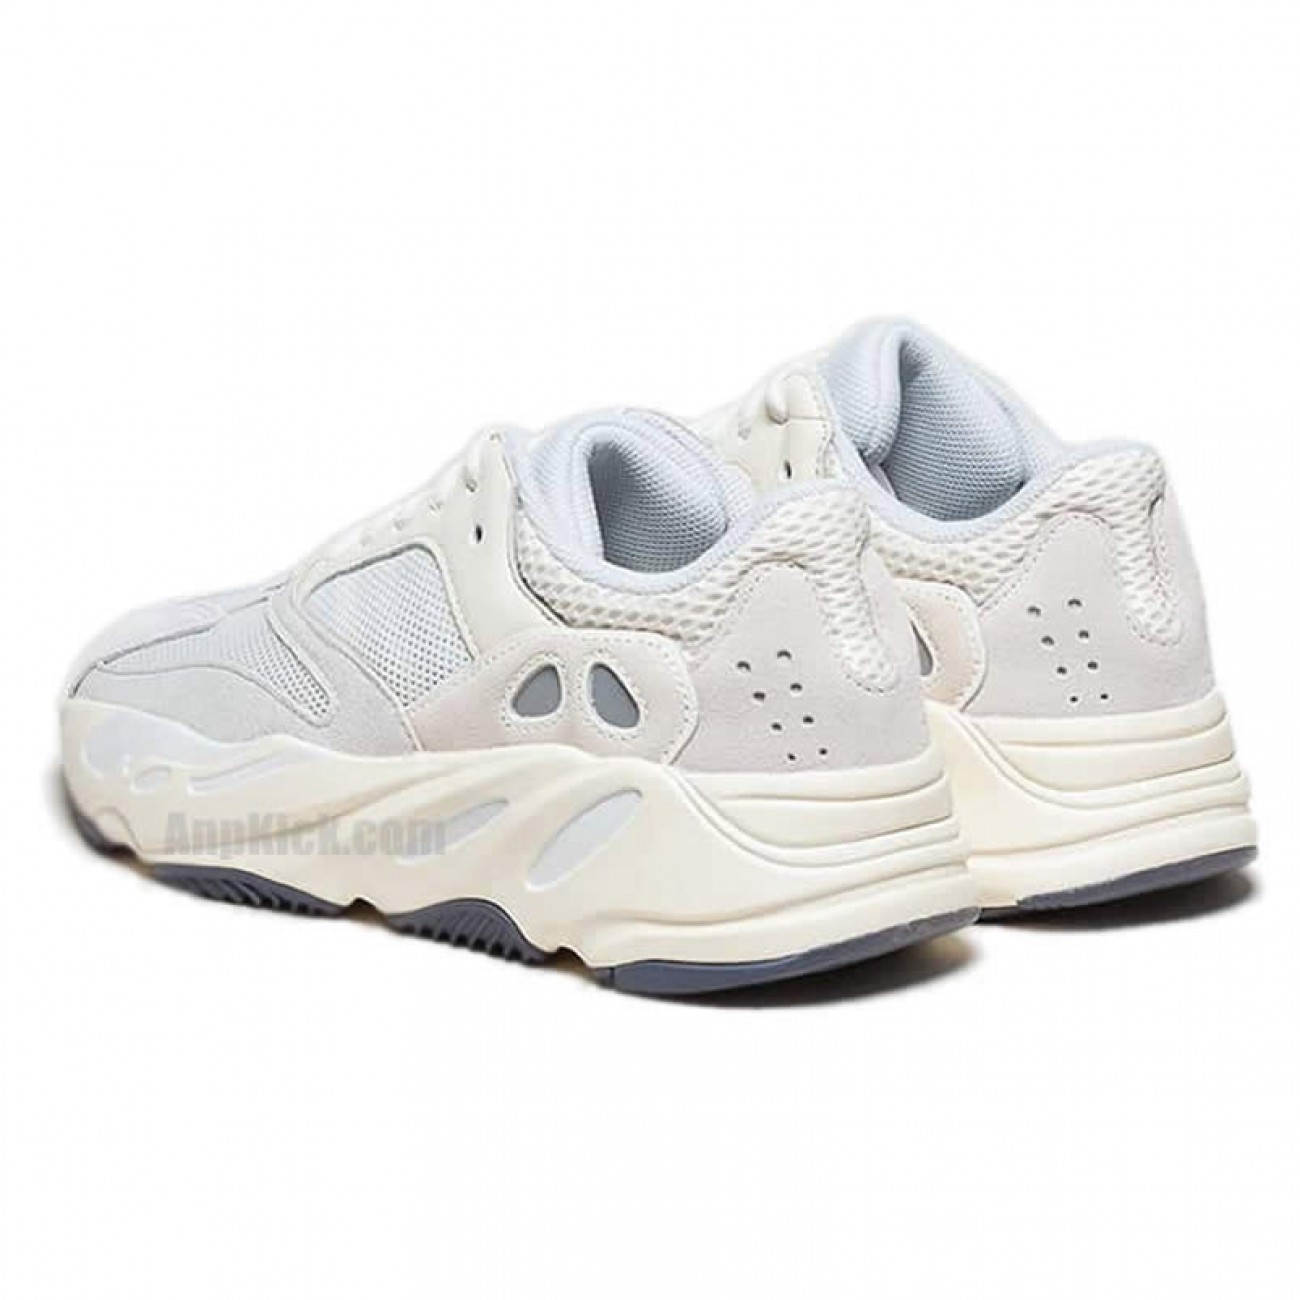 adidas Yeezy Boost 700 Analog Outfit On Foot Release Date EG7596